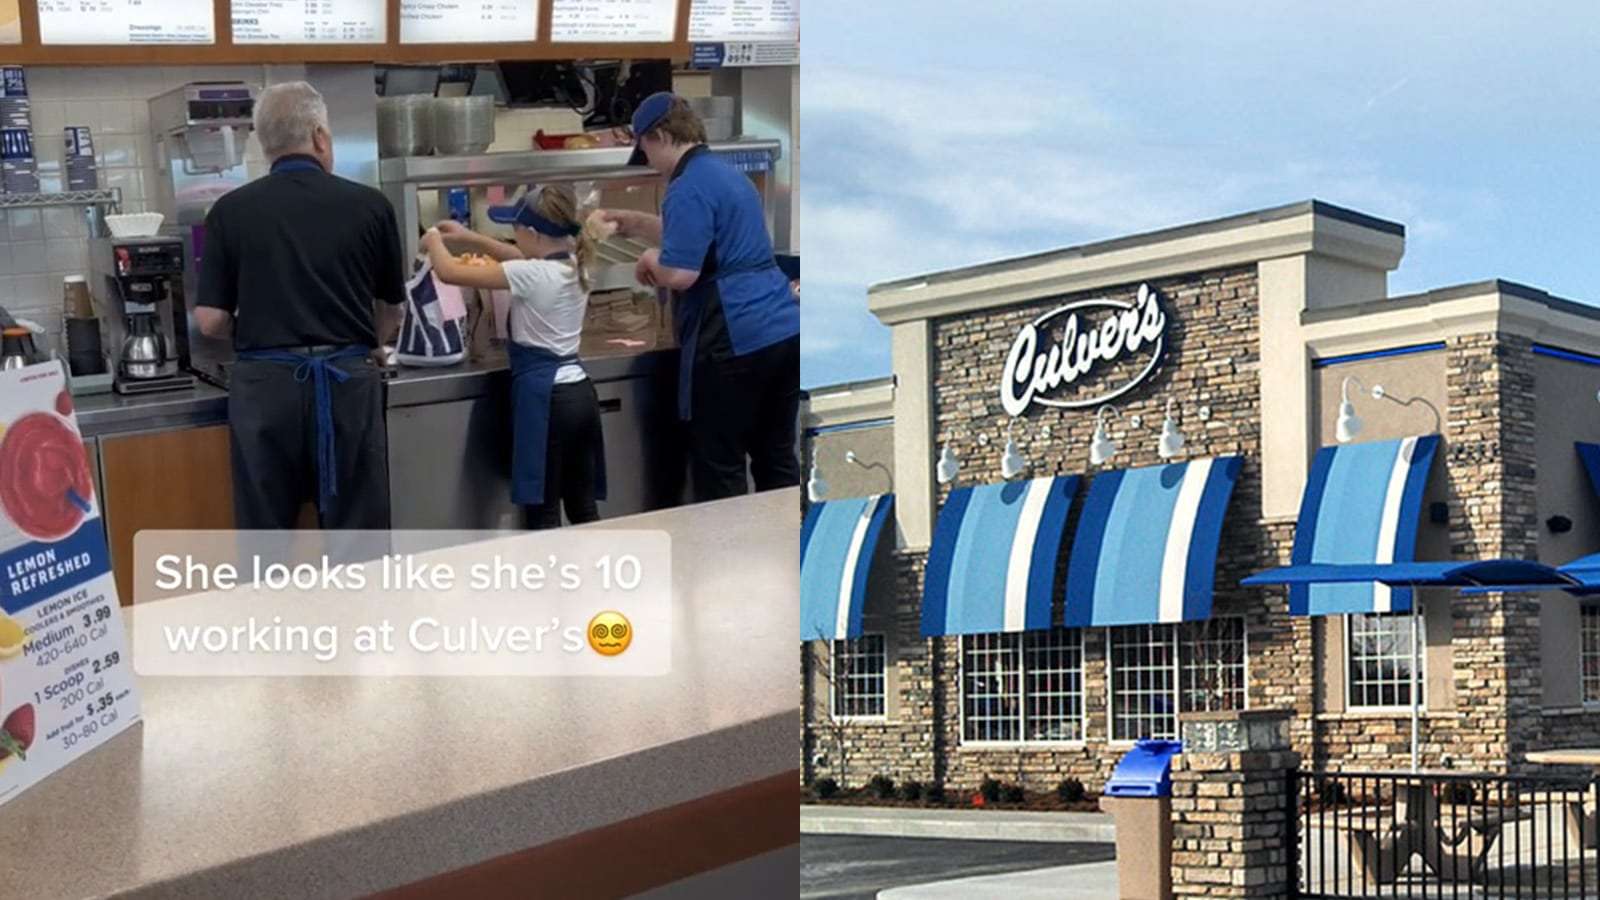 Middle Schooler working at Culvers